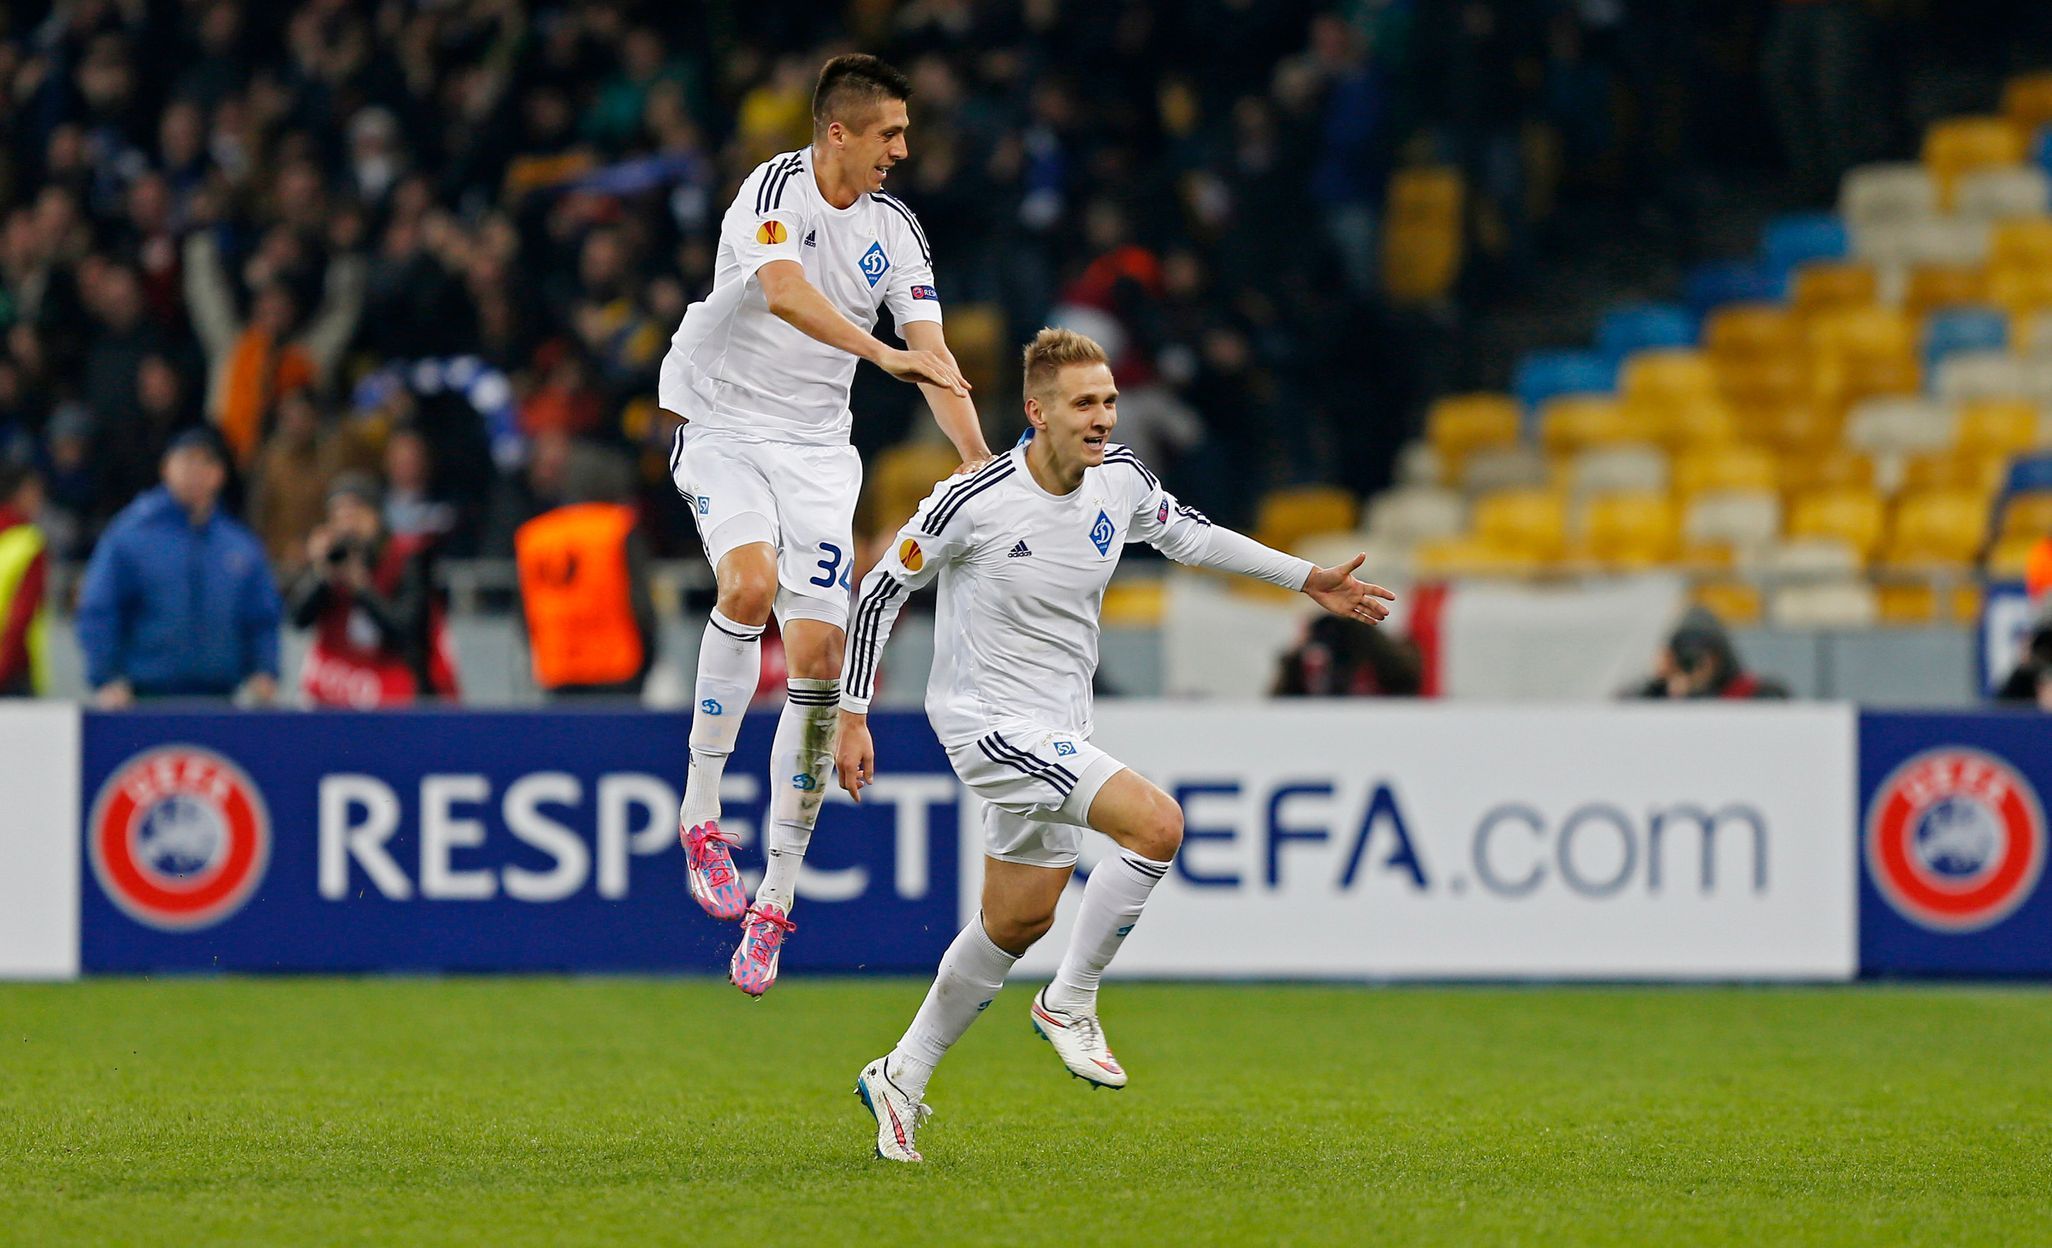 Football: Lukasz Teodorczyk celebrates with team mates after scoring the second goal for Dynamo Kyjev